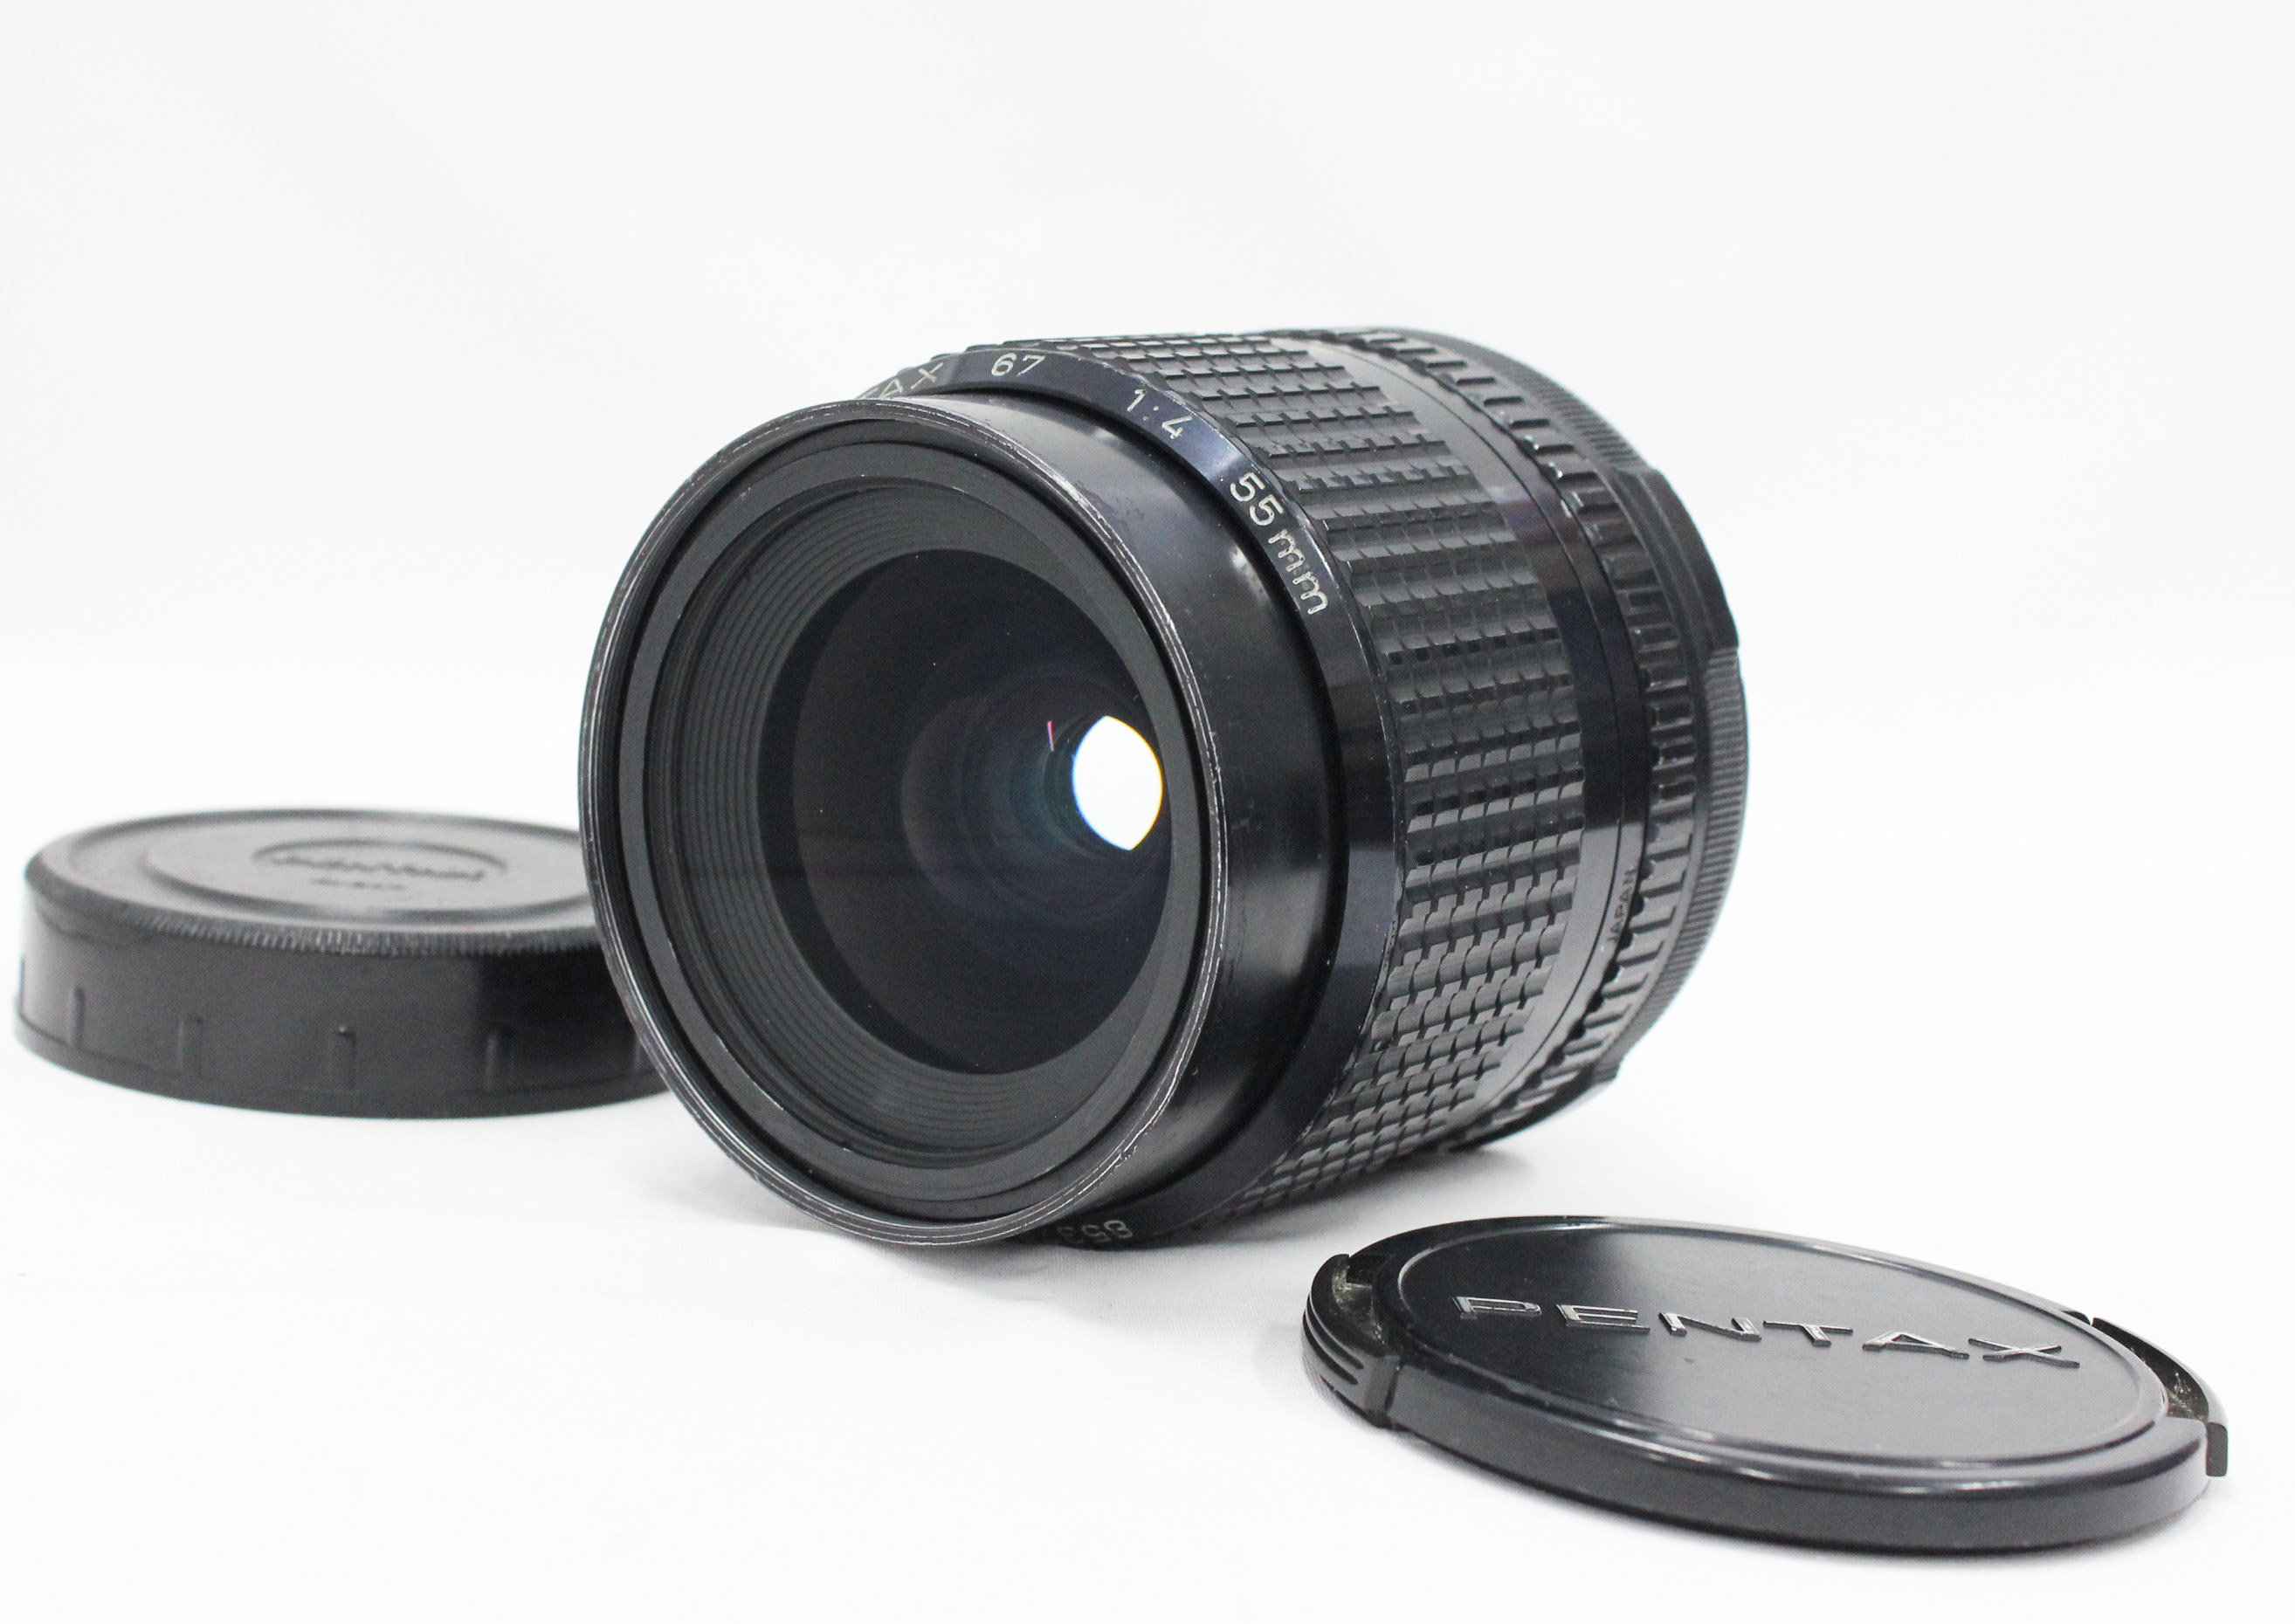 Japan Used Camera Shop | [Excellent++++] SMC Pentax 67 55mm F/4 Lens for Pentax 67 67II from Japan